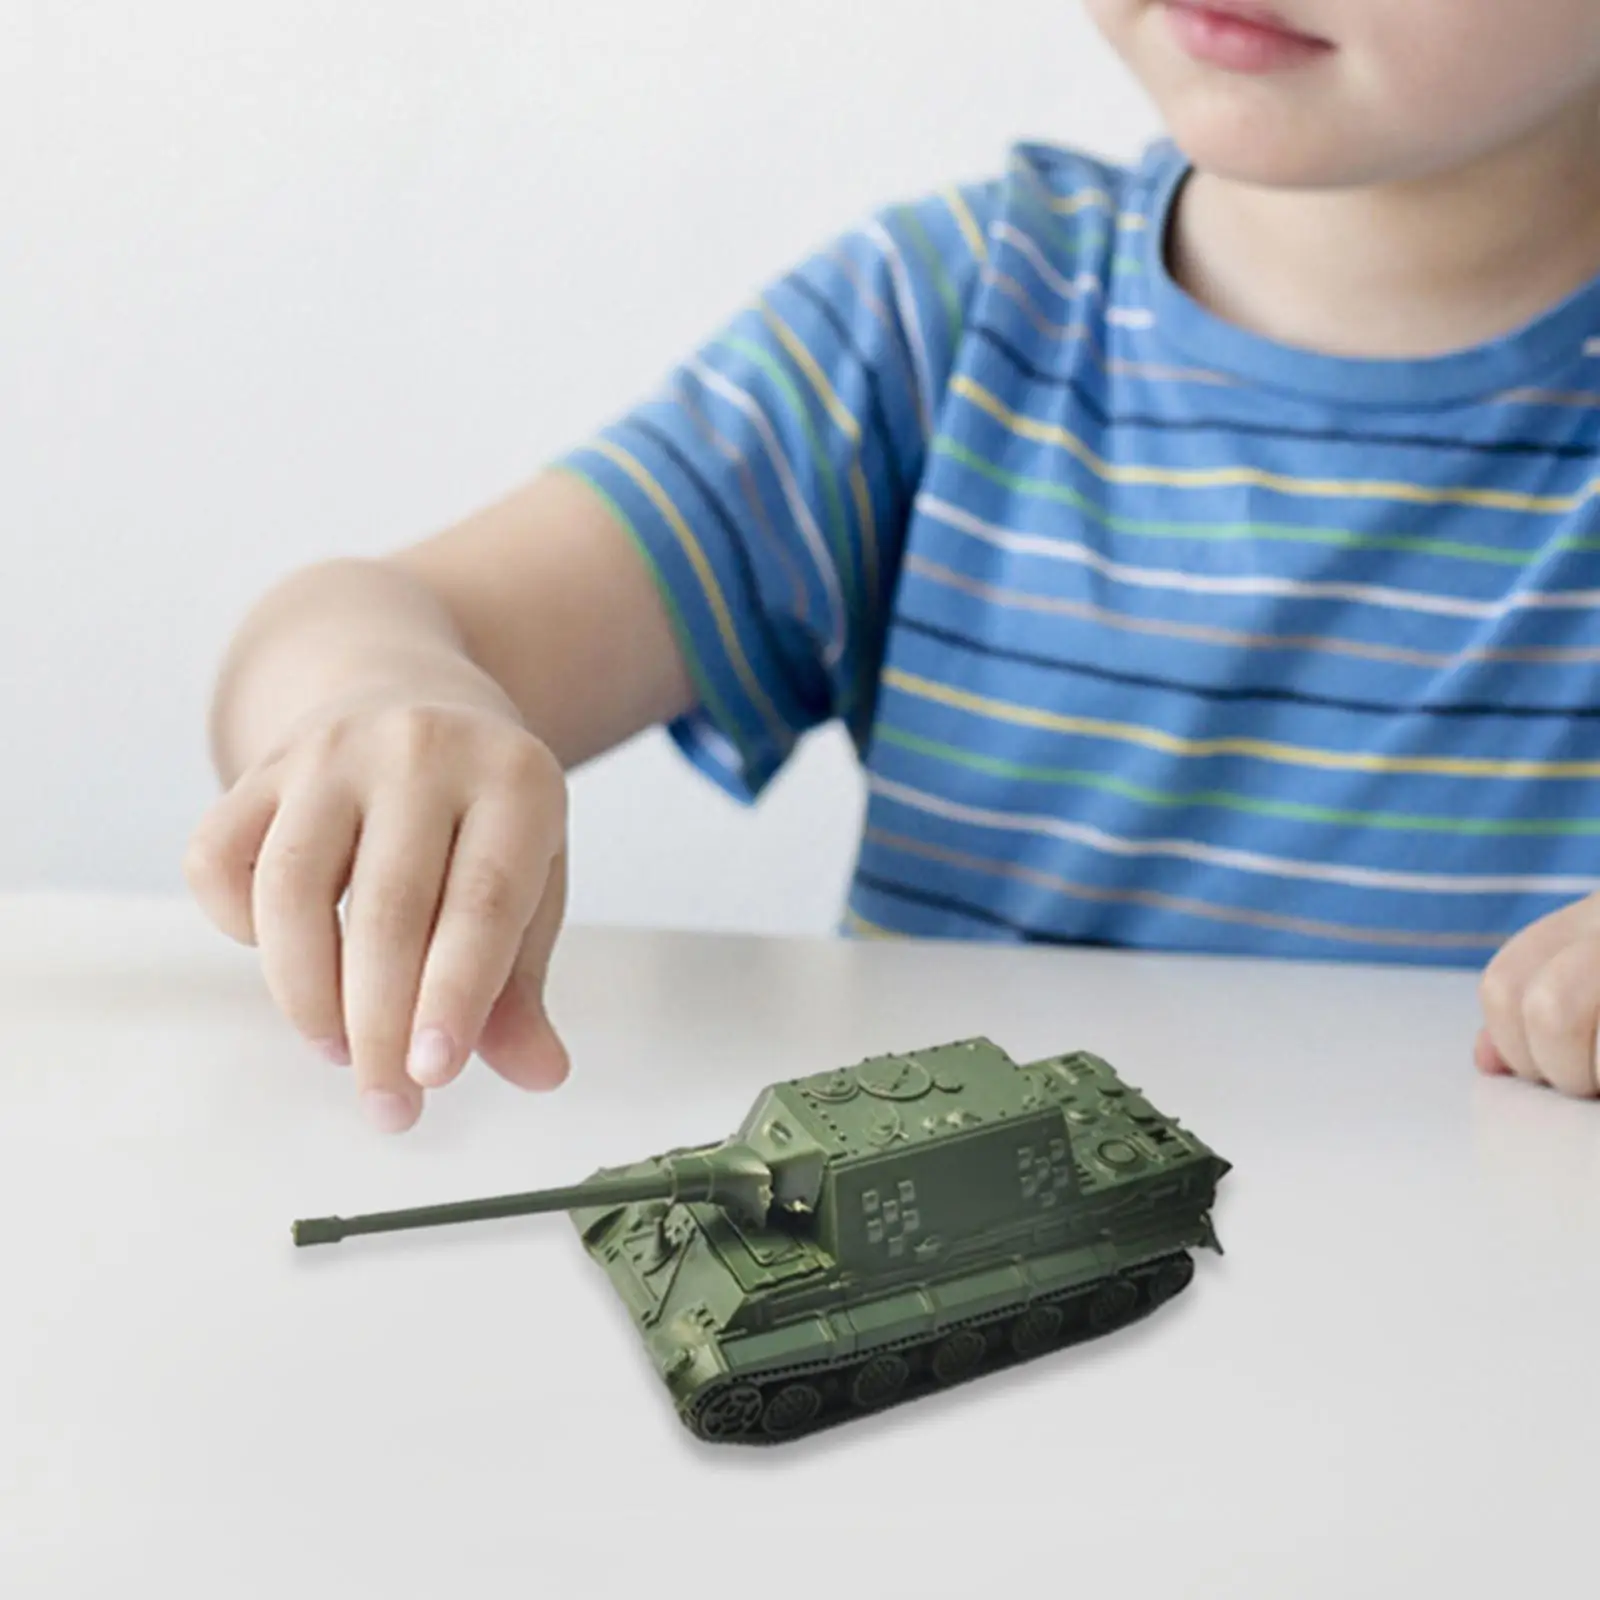 1:144 Puzzles Education Toy Assembled Tank Model Armored Tank Model for Children Tabletop Decor Display Collectibles Kids